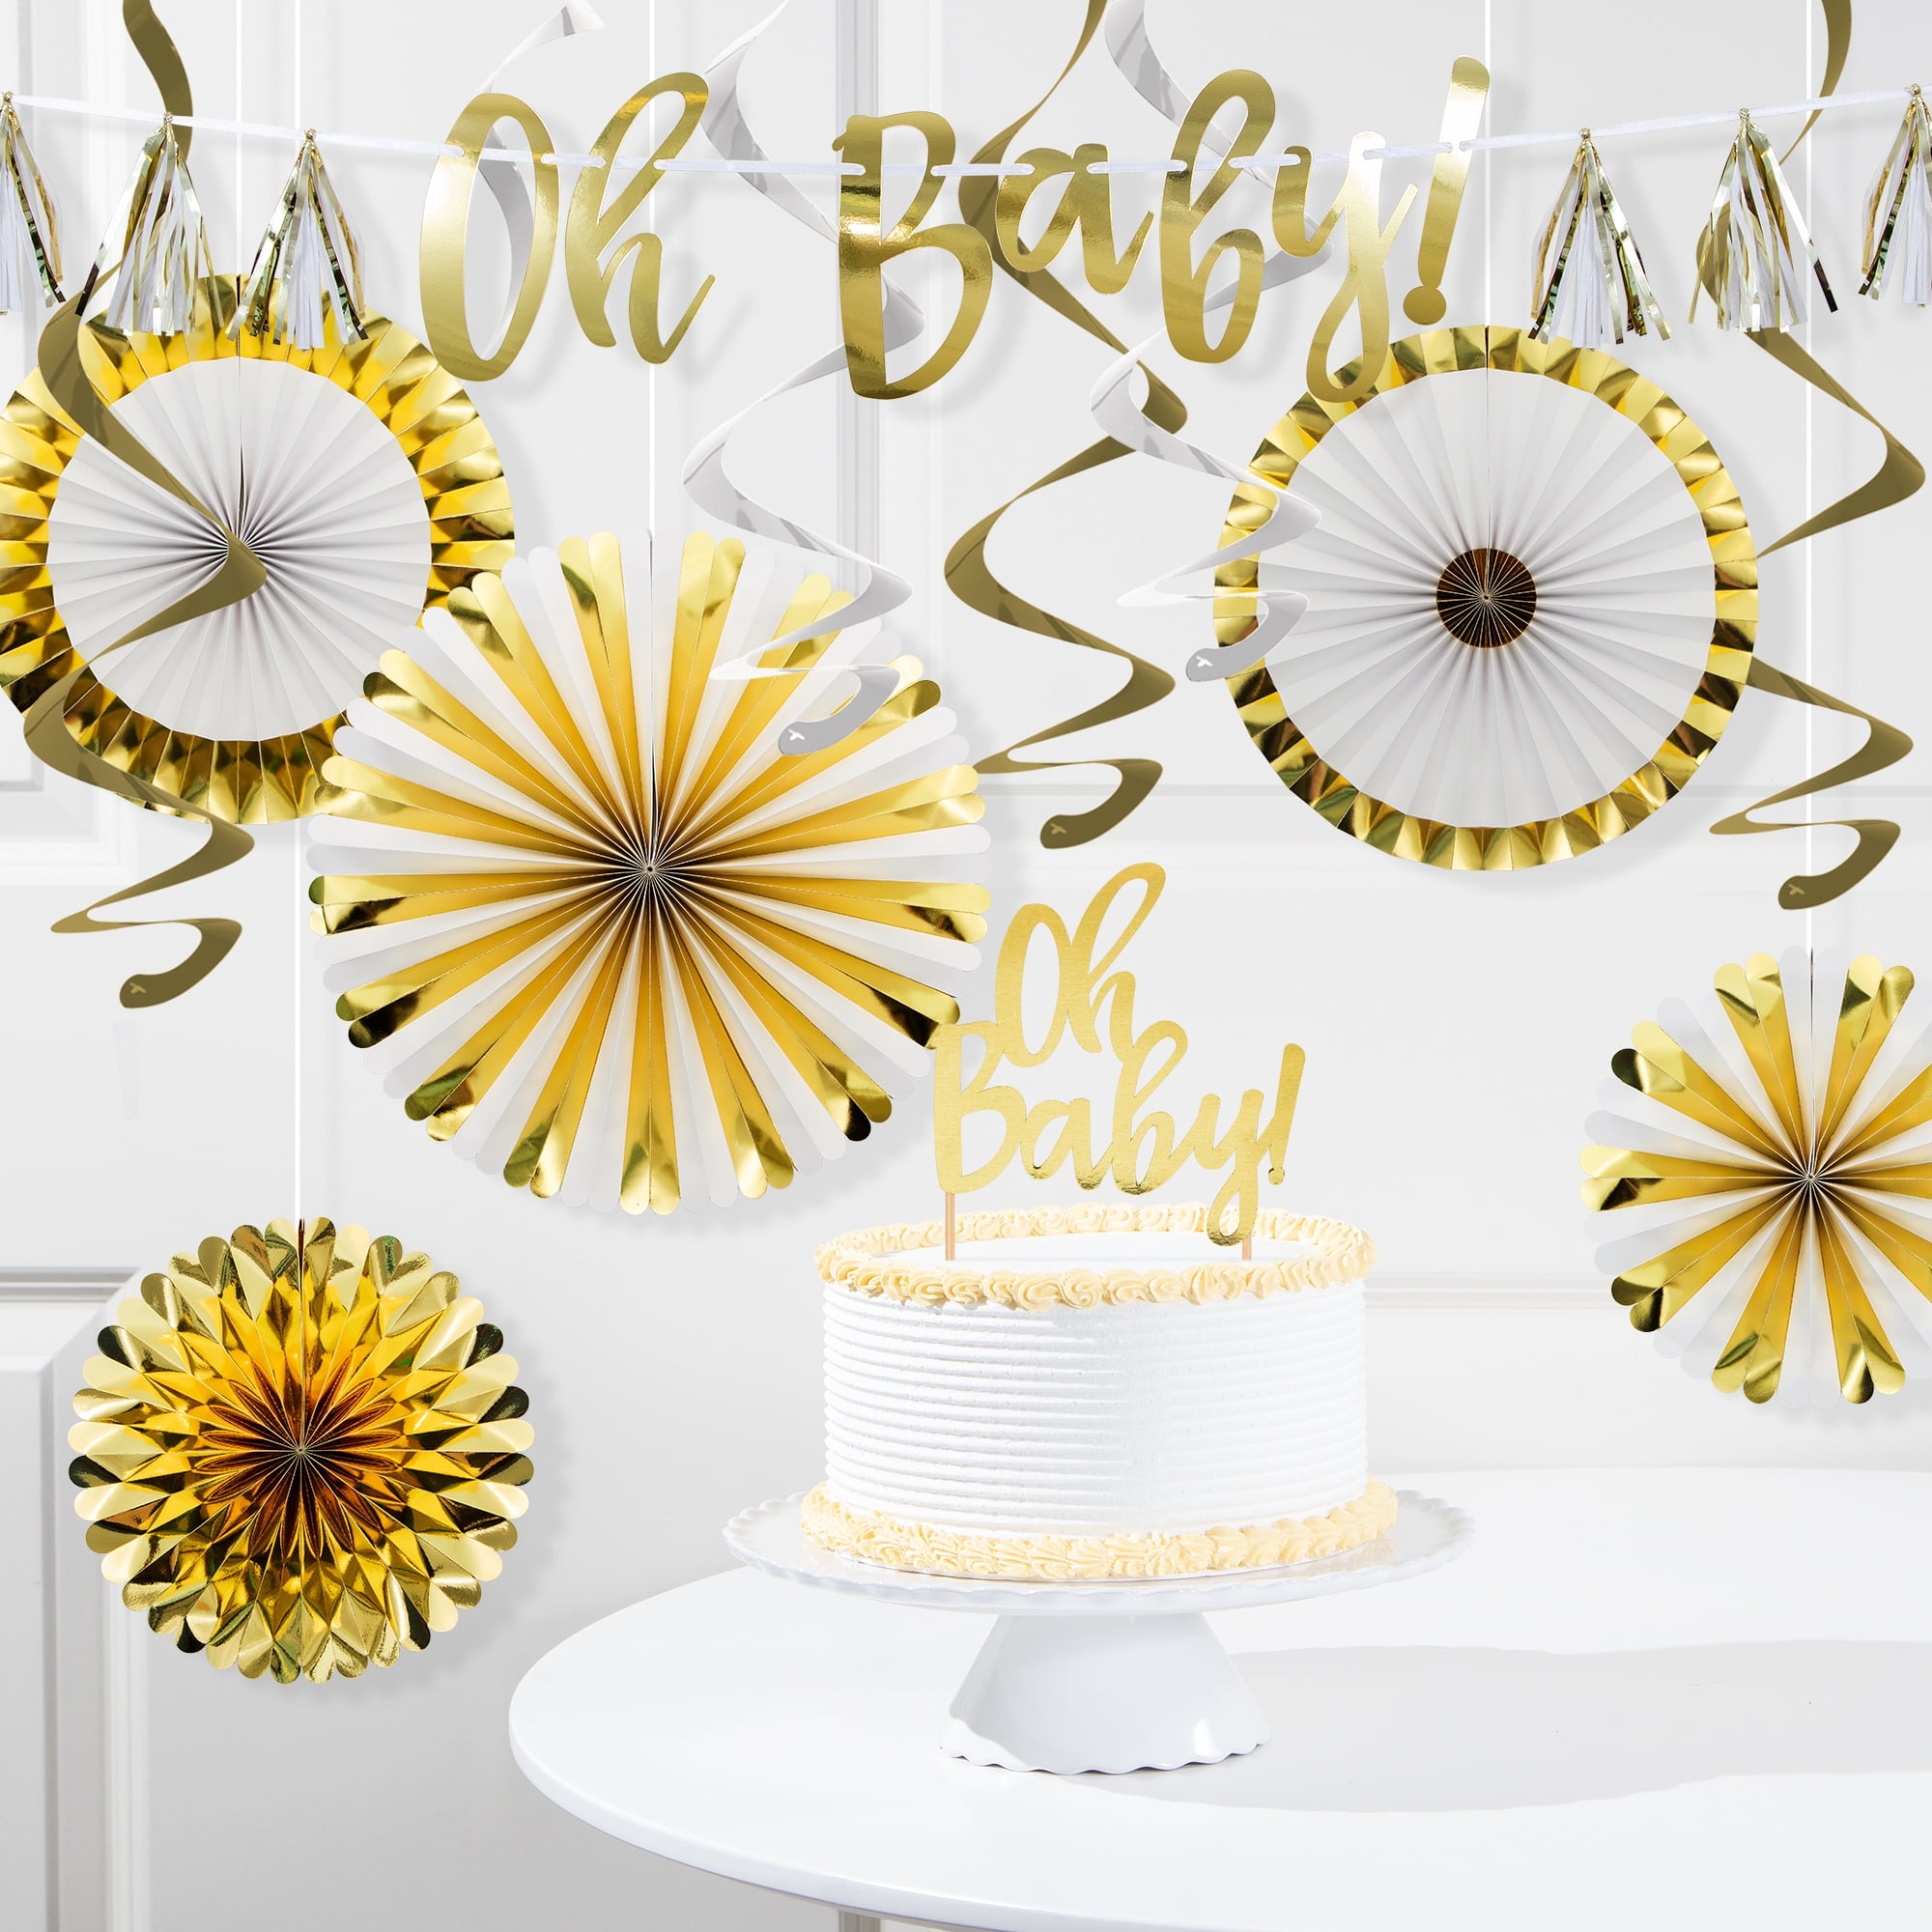  Gold Glitter Welcome Baby Boy Cake Topper - Baby Shower Party  Decorations - Boy First Birthday Party Decorations - Gender Reveal for Baby  Boy Party Decorations : Grocery & Gourmet Food